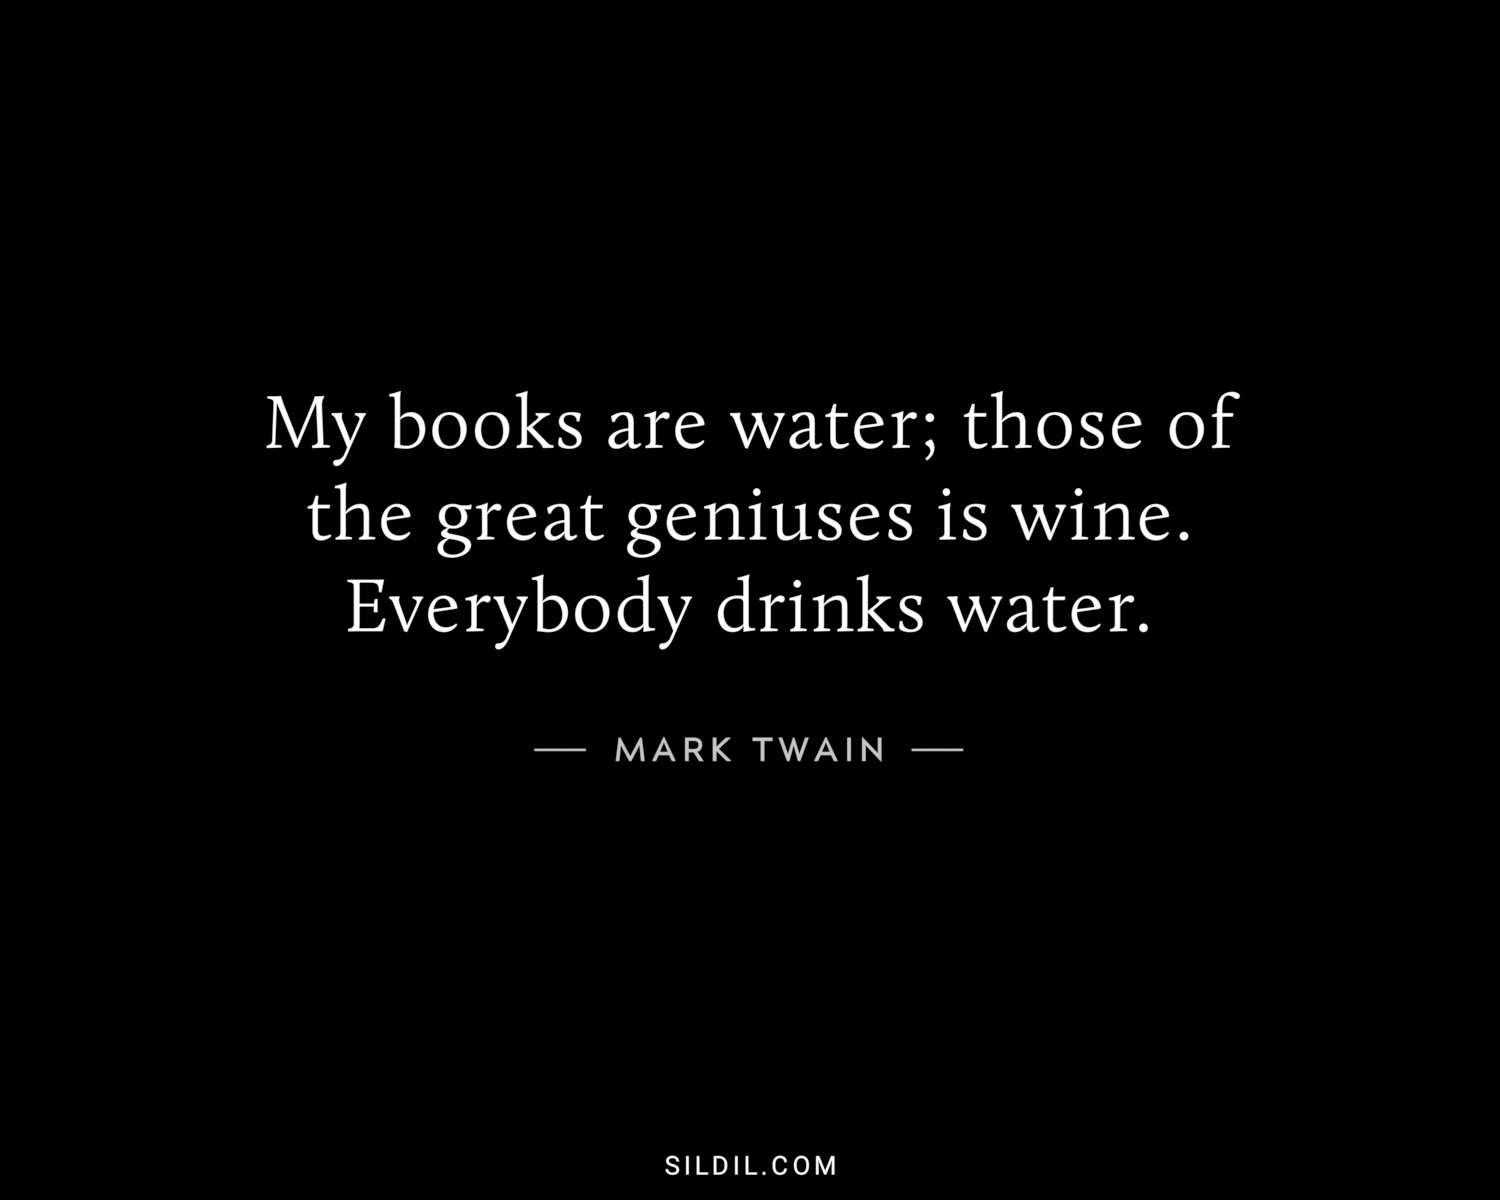 My books are water; those of the great geniuses is wine. Everybody drinks water.